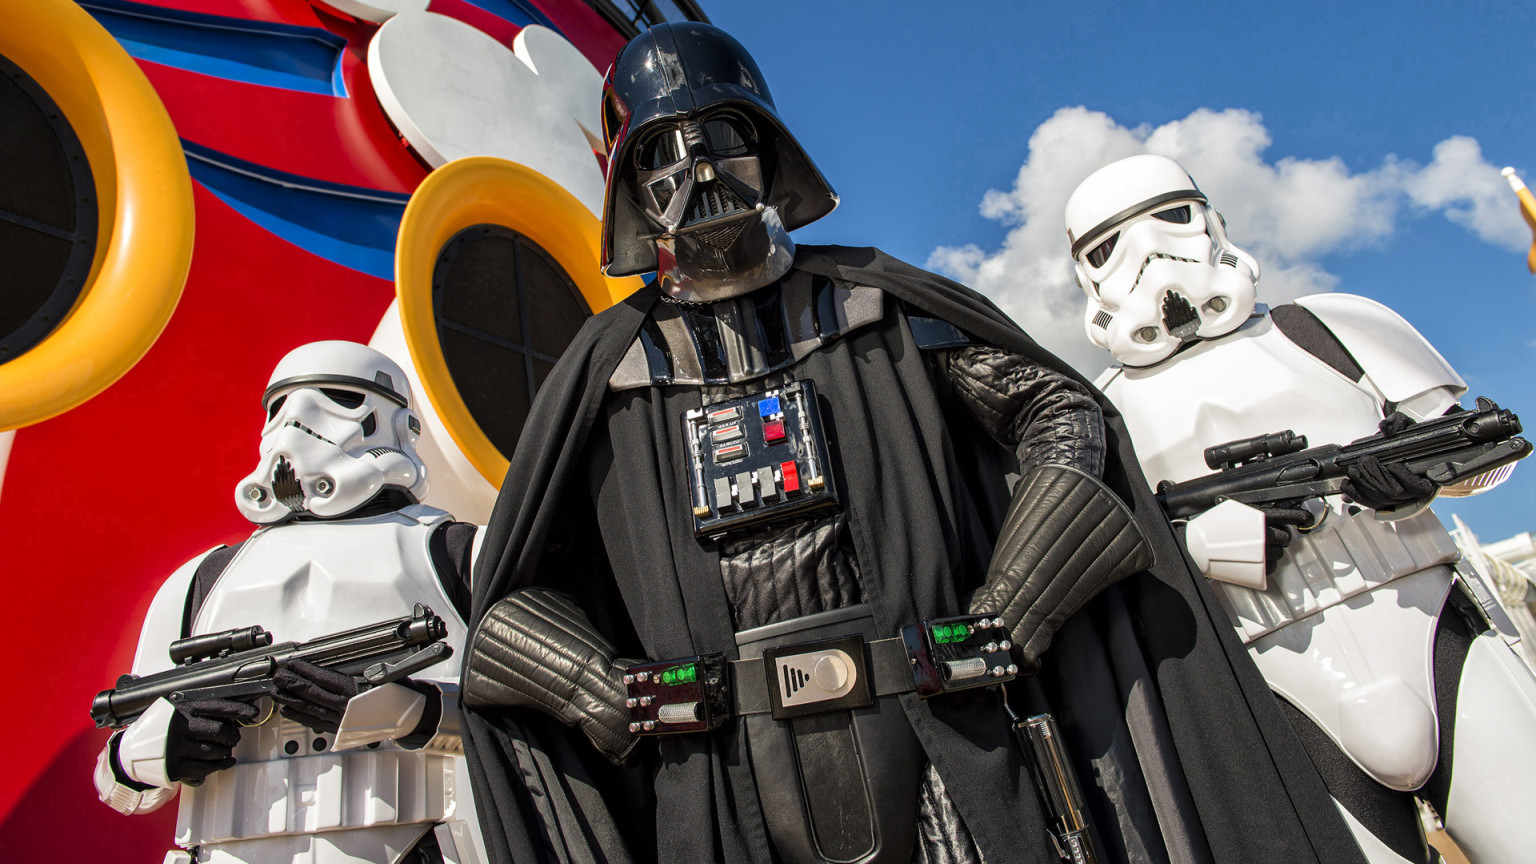 Featured image for “Disney Cruise Line Returns In 2019 With Marvel And Star Wars Day At Sea”